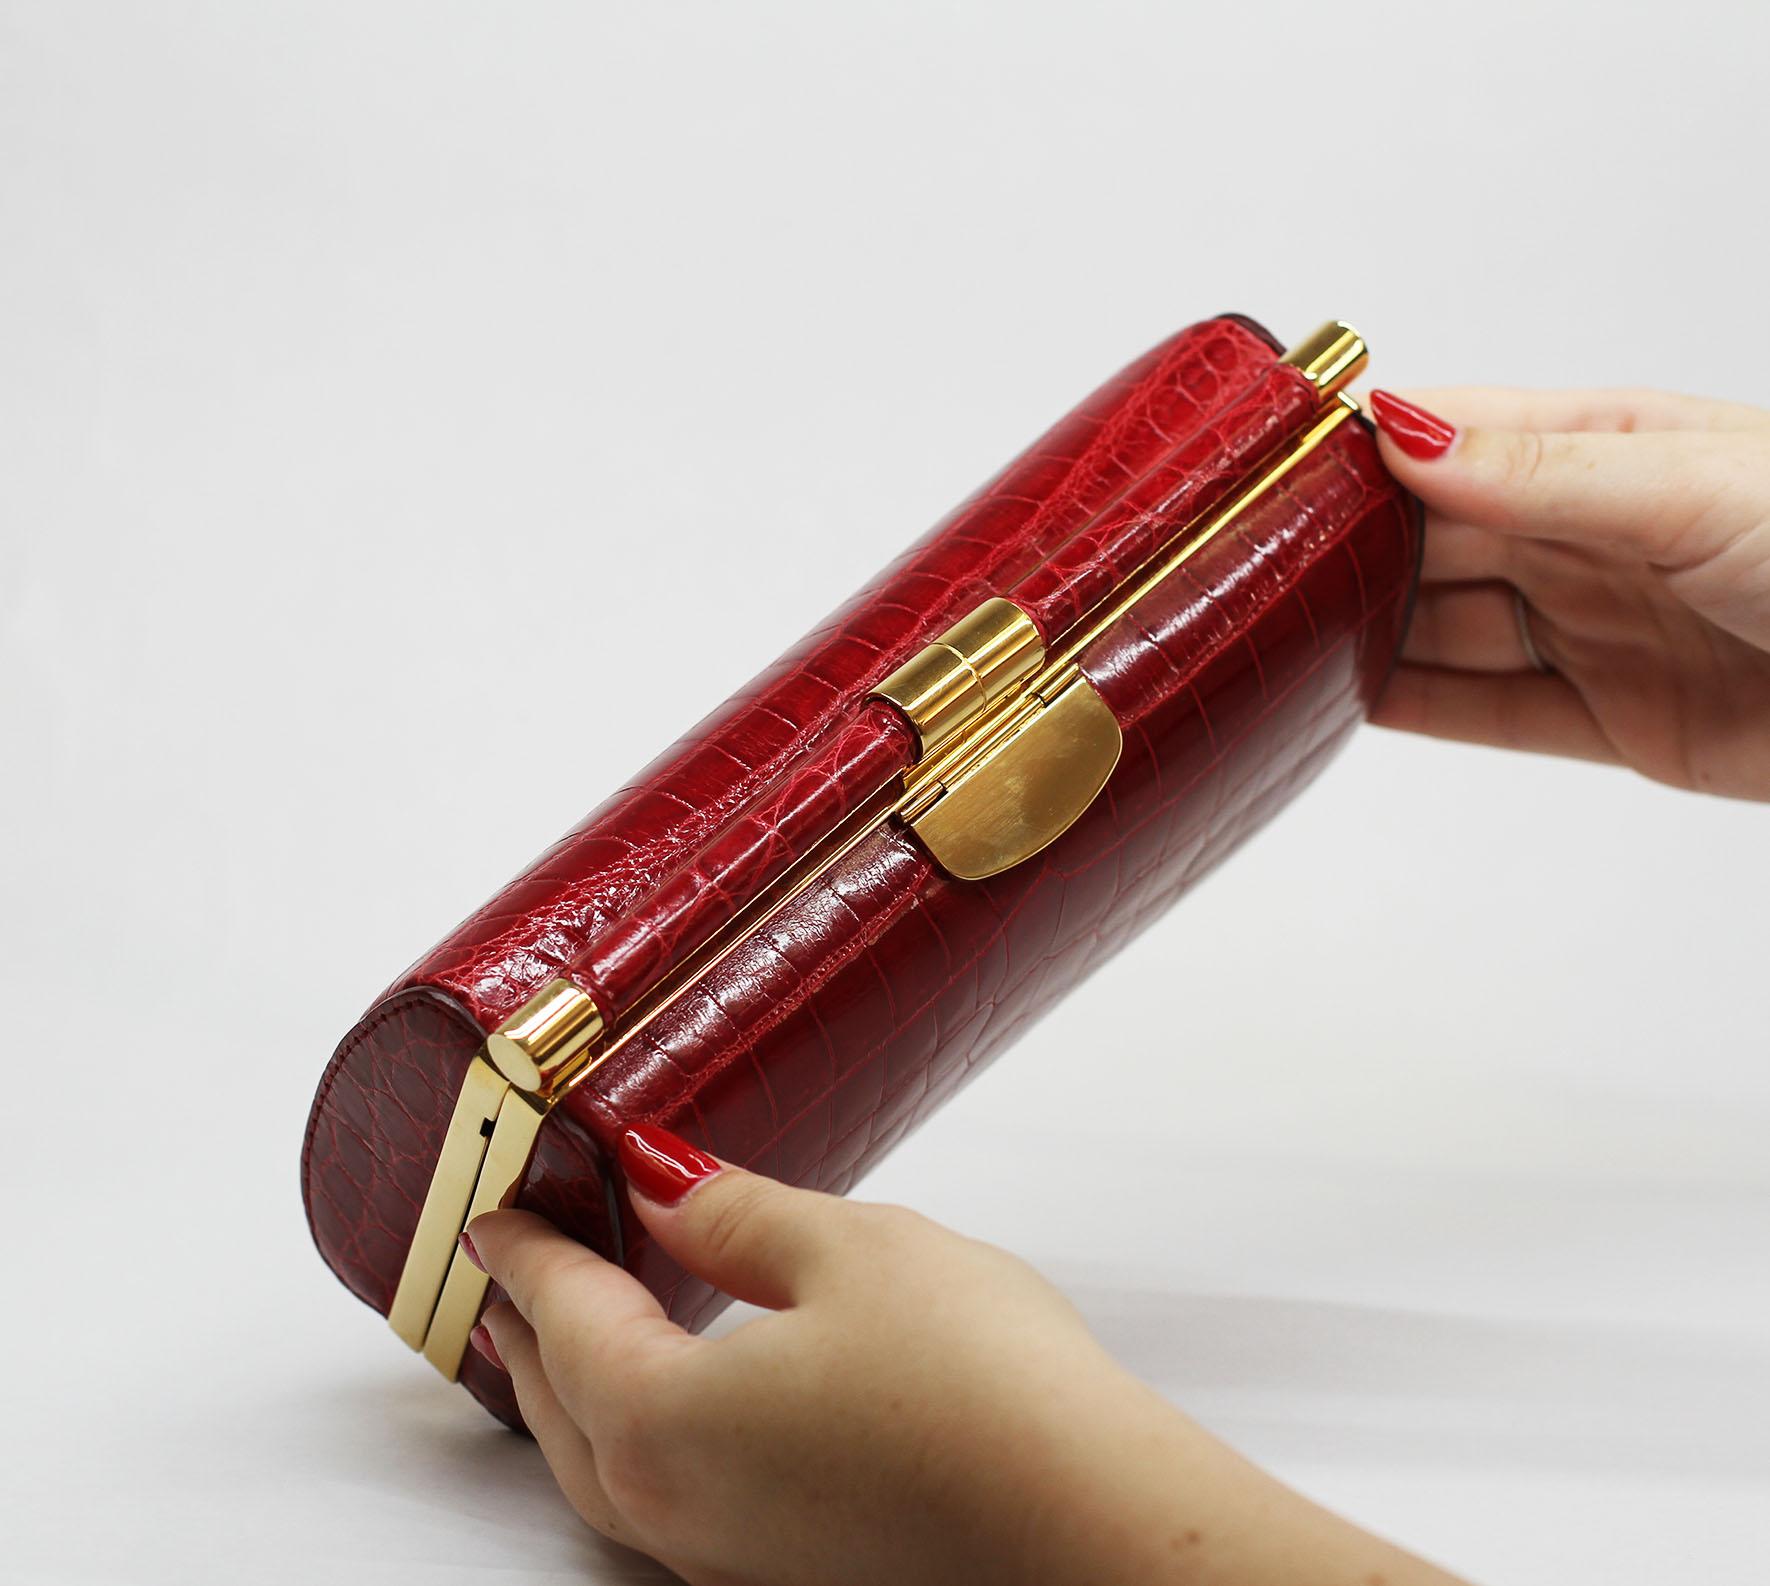 large red clutch